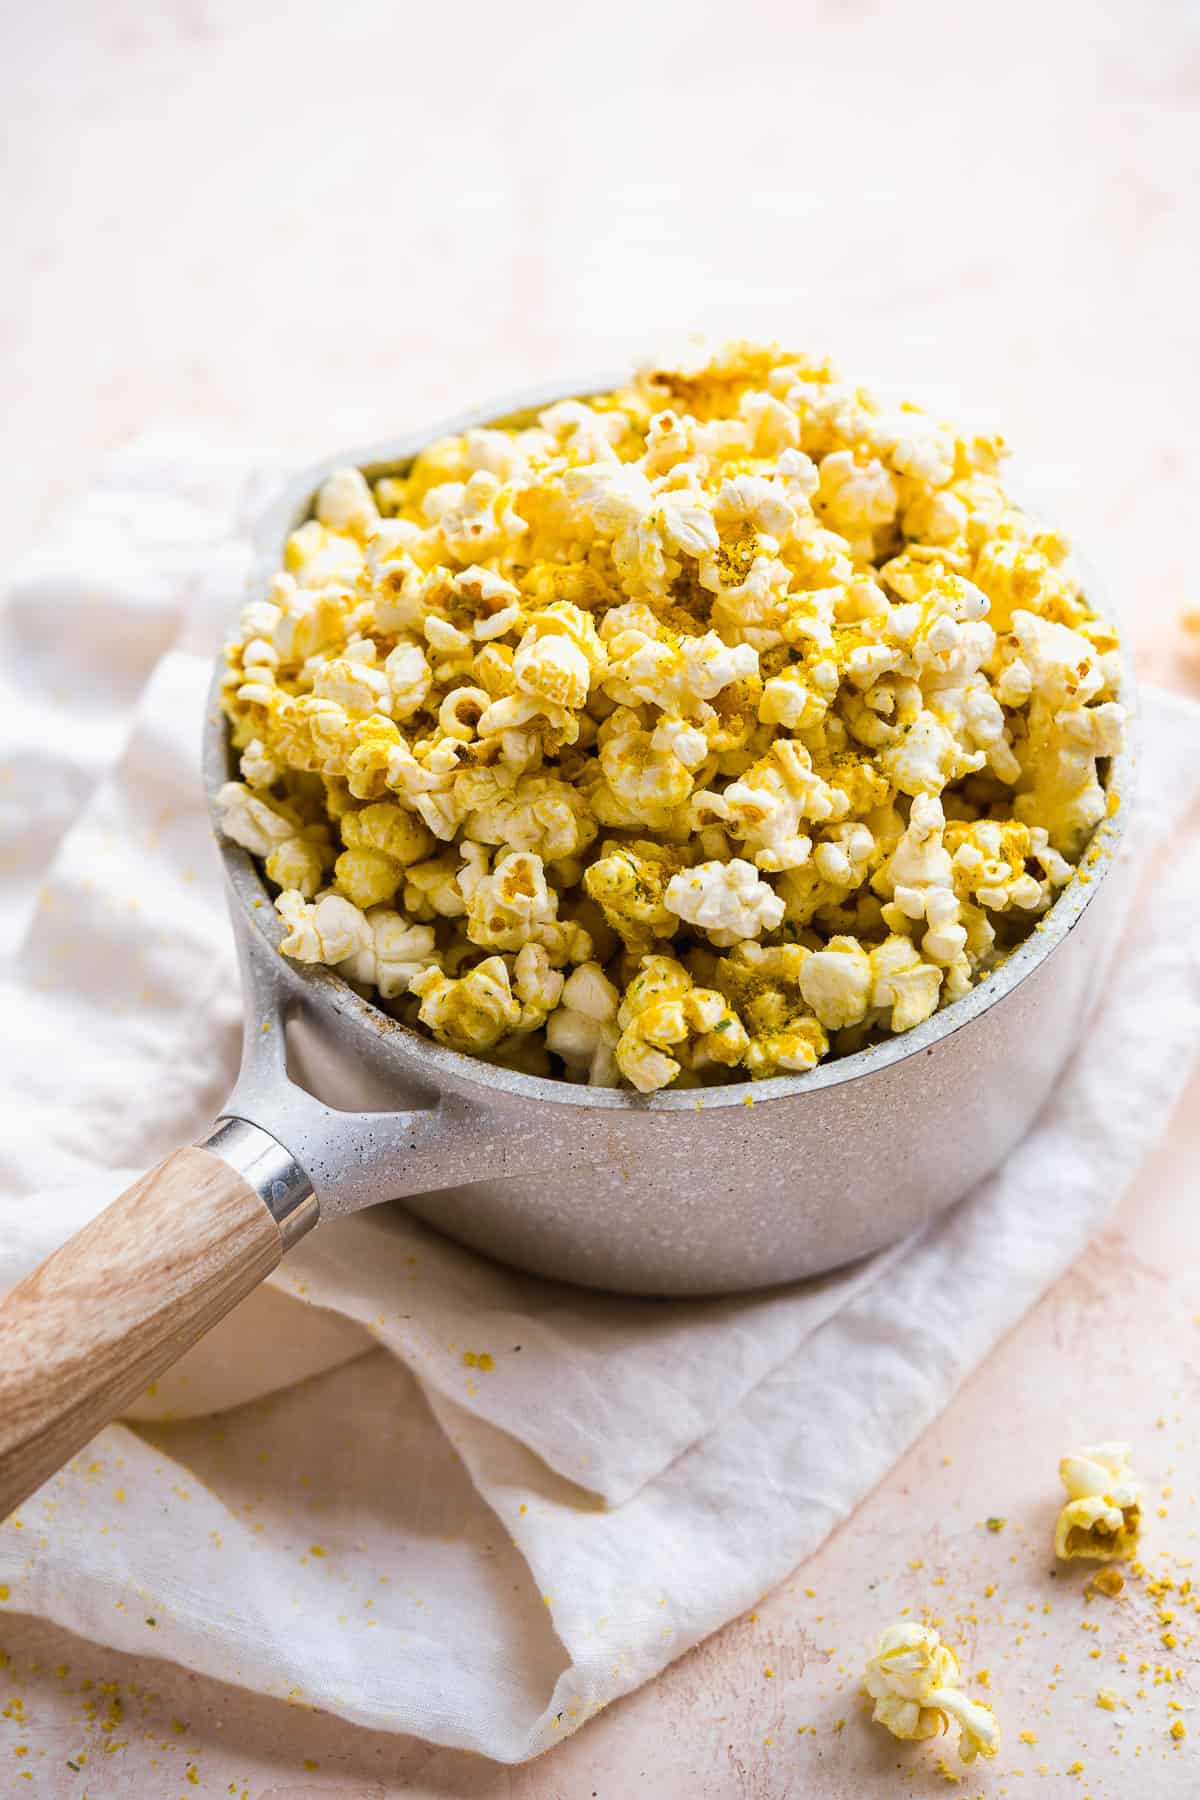 Grey pot filled with cheesy popcorn on white towel.